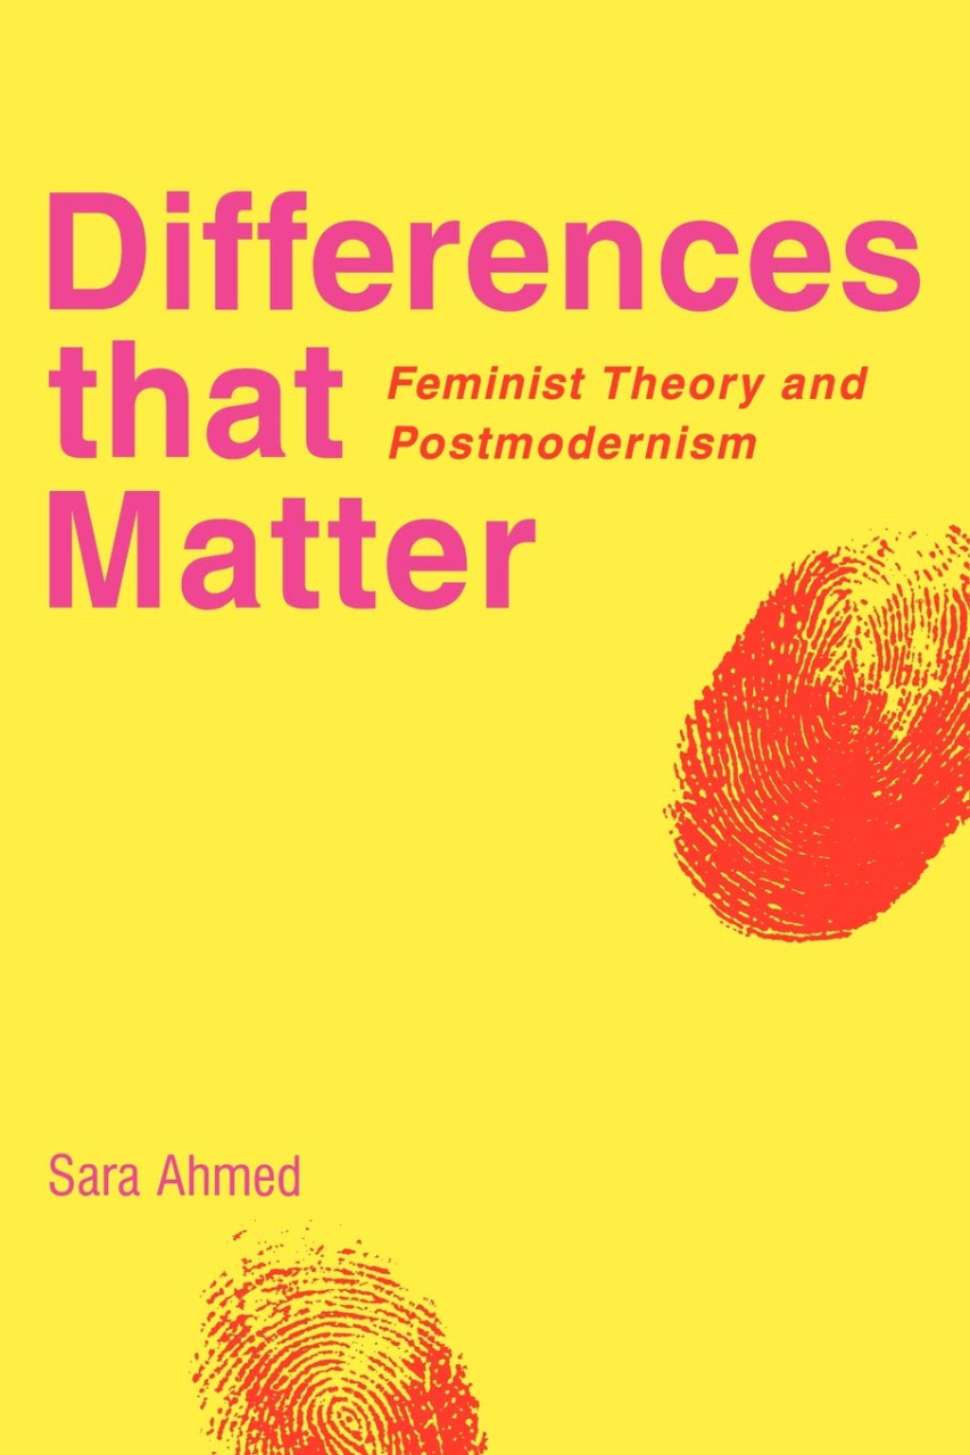 Week 1 - 21Jan -  Differences That Matter Feminist Theory and Postmodernism.jpg